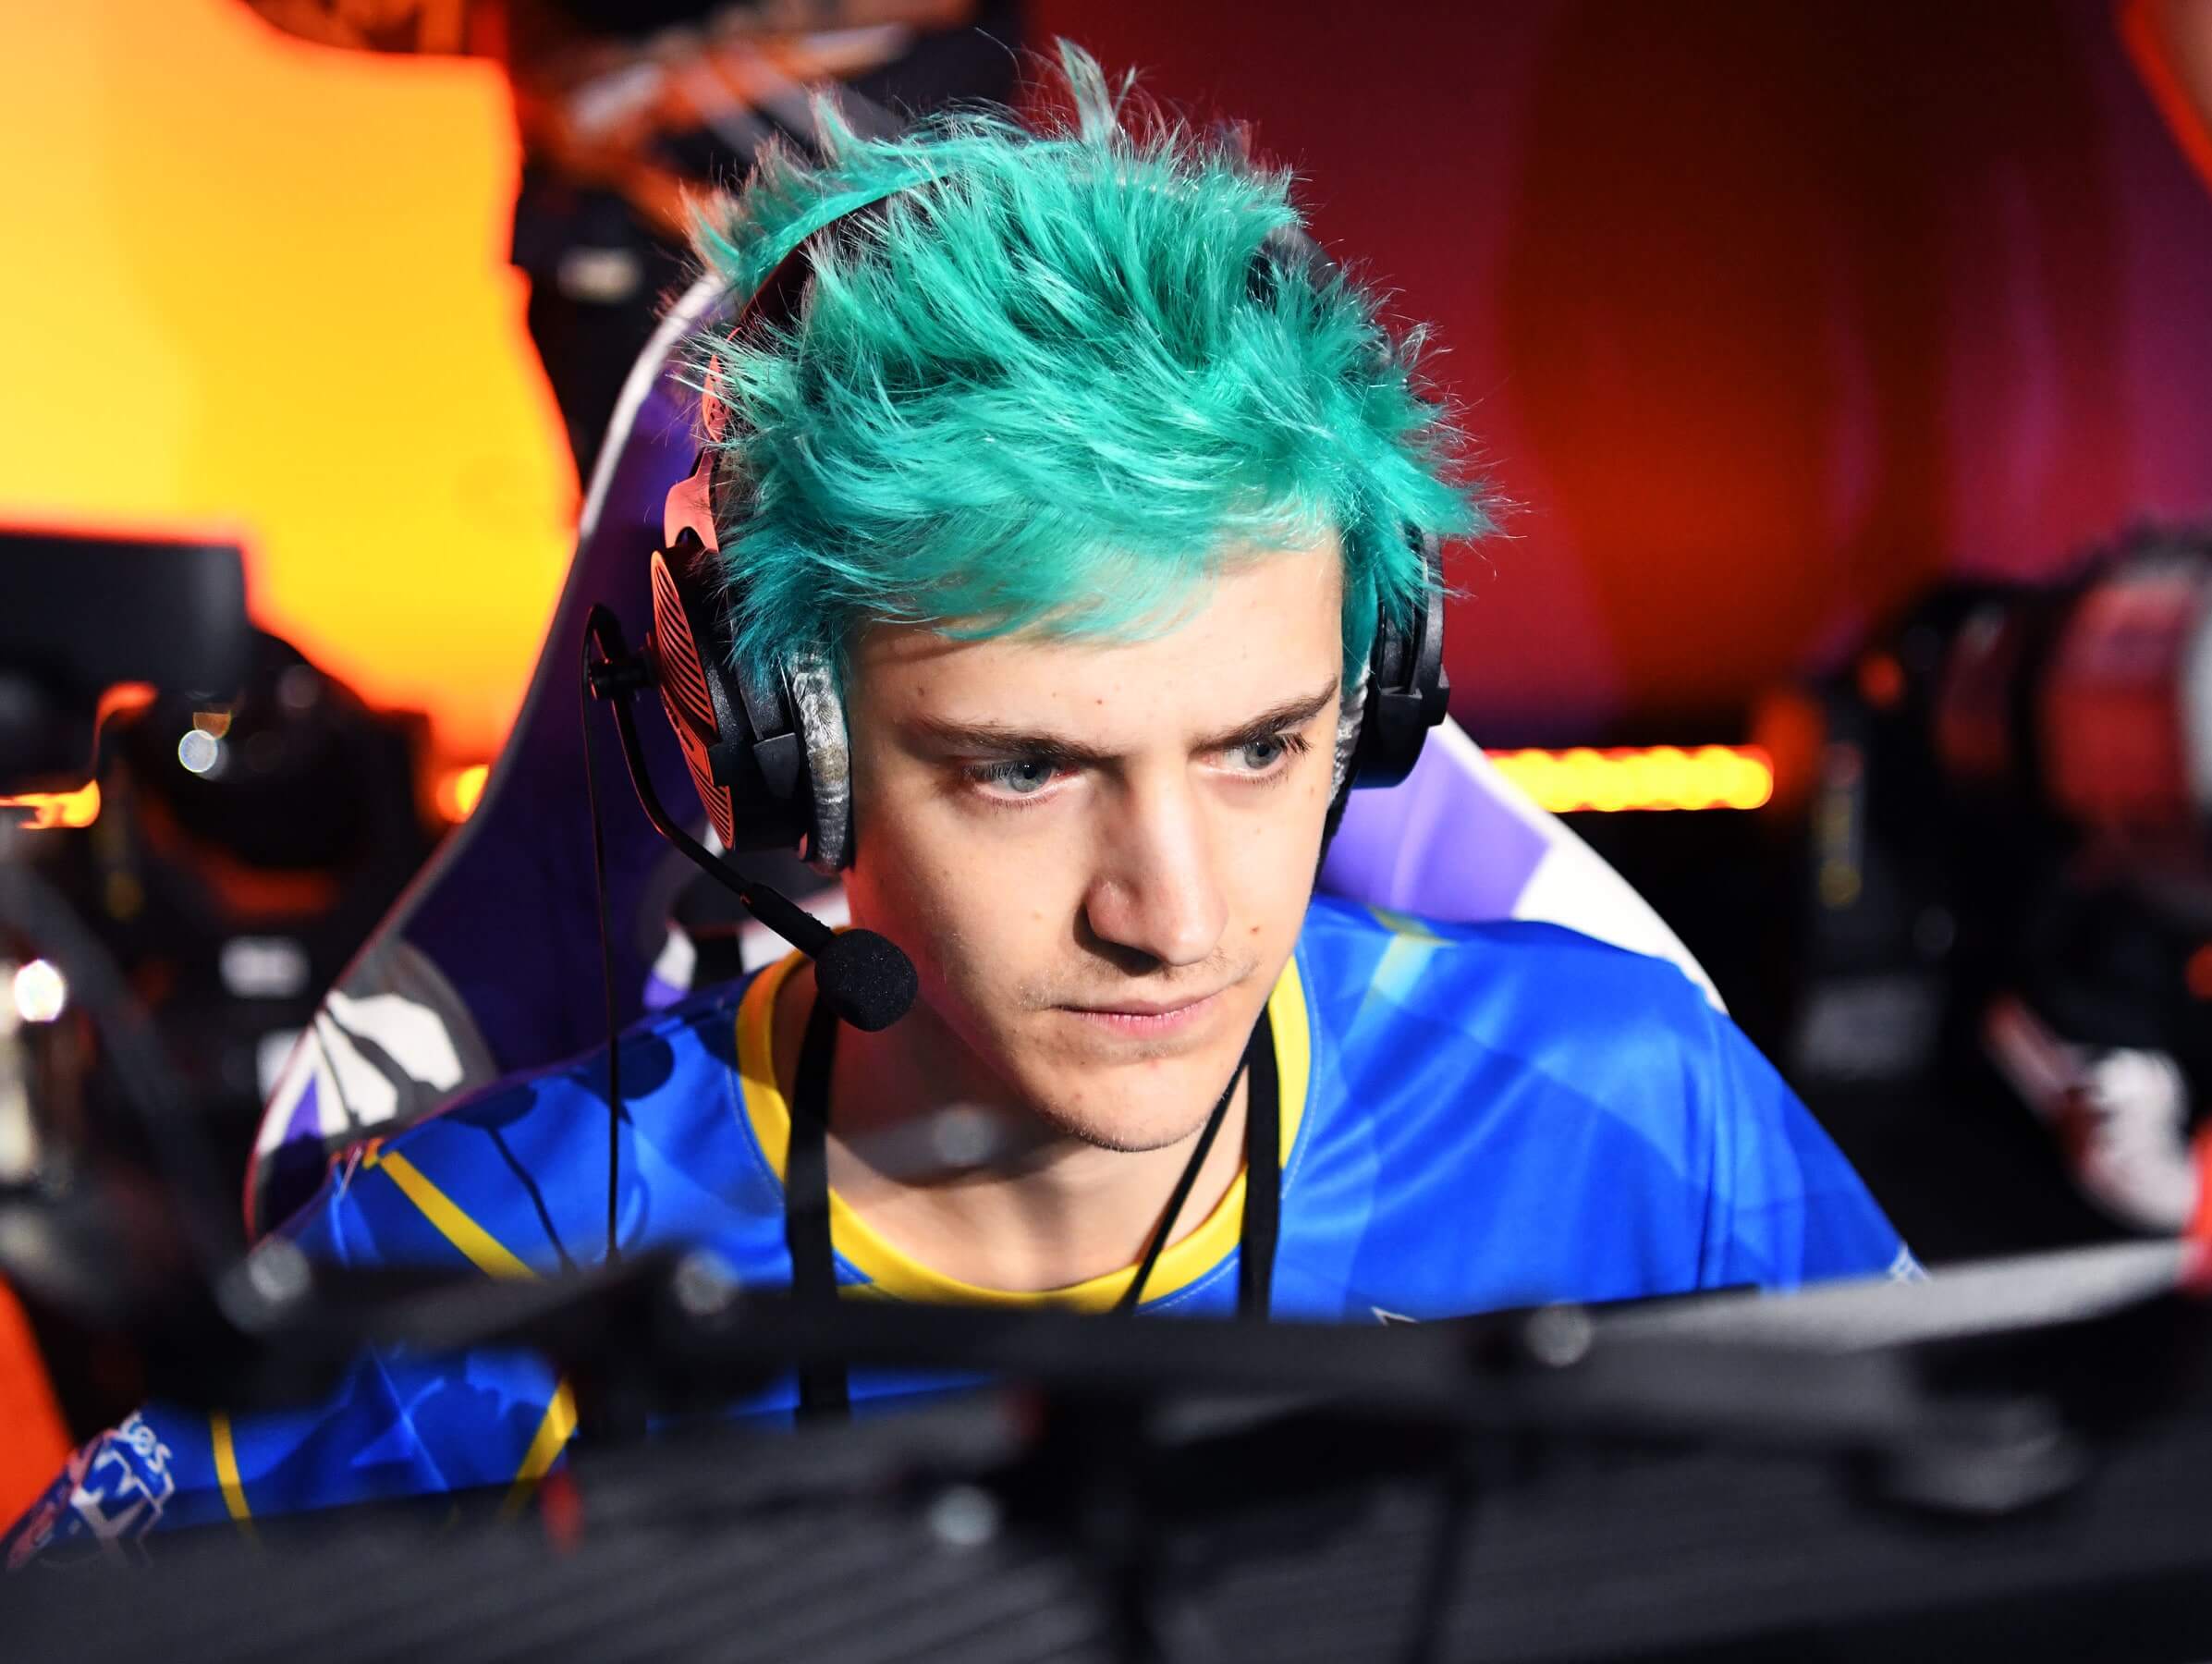 Mixer to air a weekly Fortnite tournament hosted by Ninja